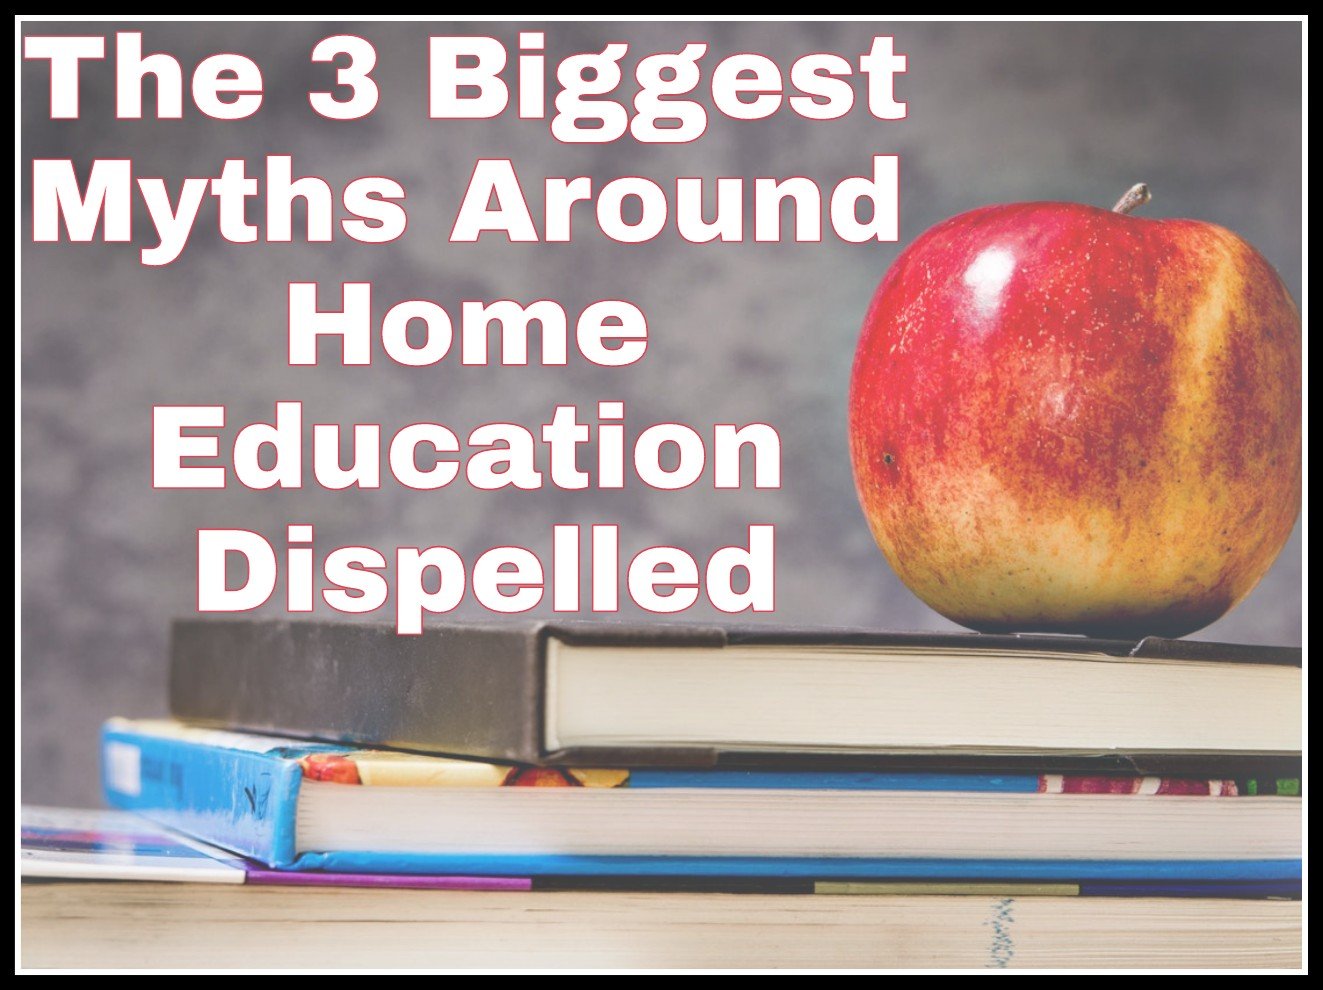 The 3 Biggest Myths Around Home Education Dispelled title with faded background image of apple on a pile of books